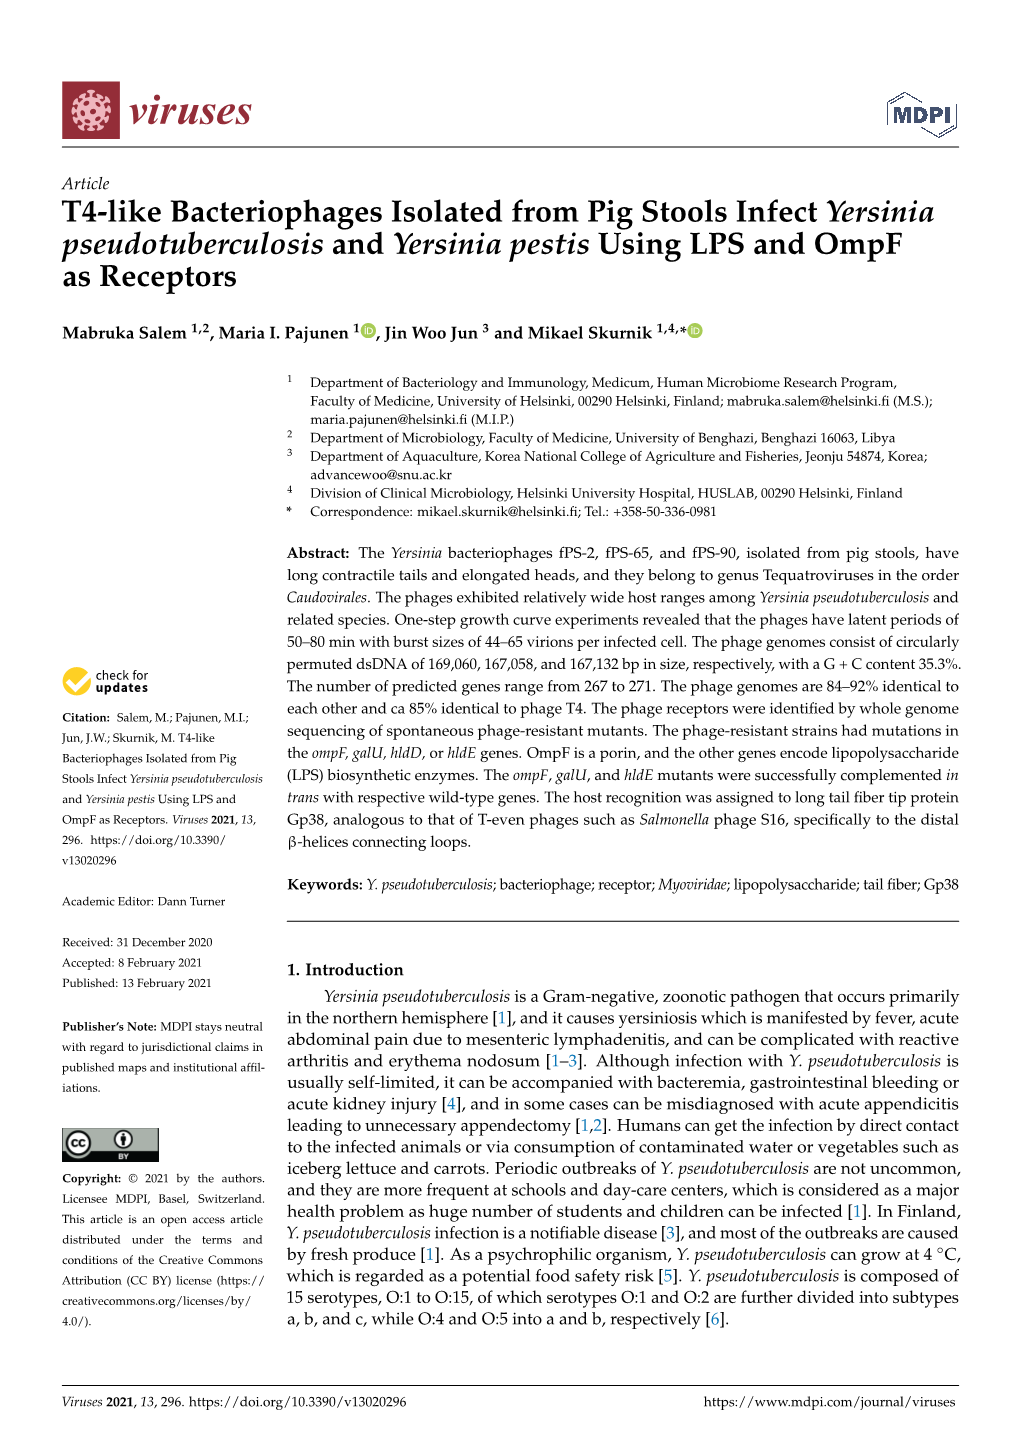 T4-Like Bacteriophages Isolated from Pig Stools Infect Yersinia Pseudotuberculosis and Yersinia Pestis Using LPS and Ompf As Receptors